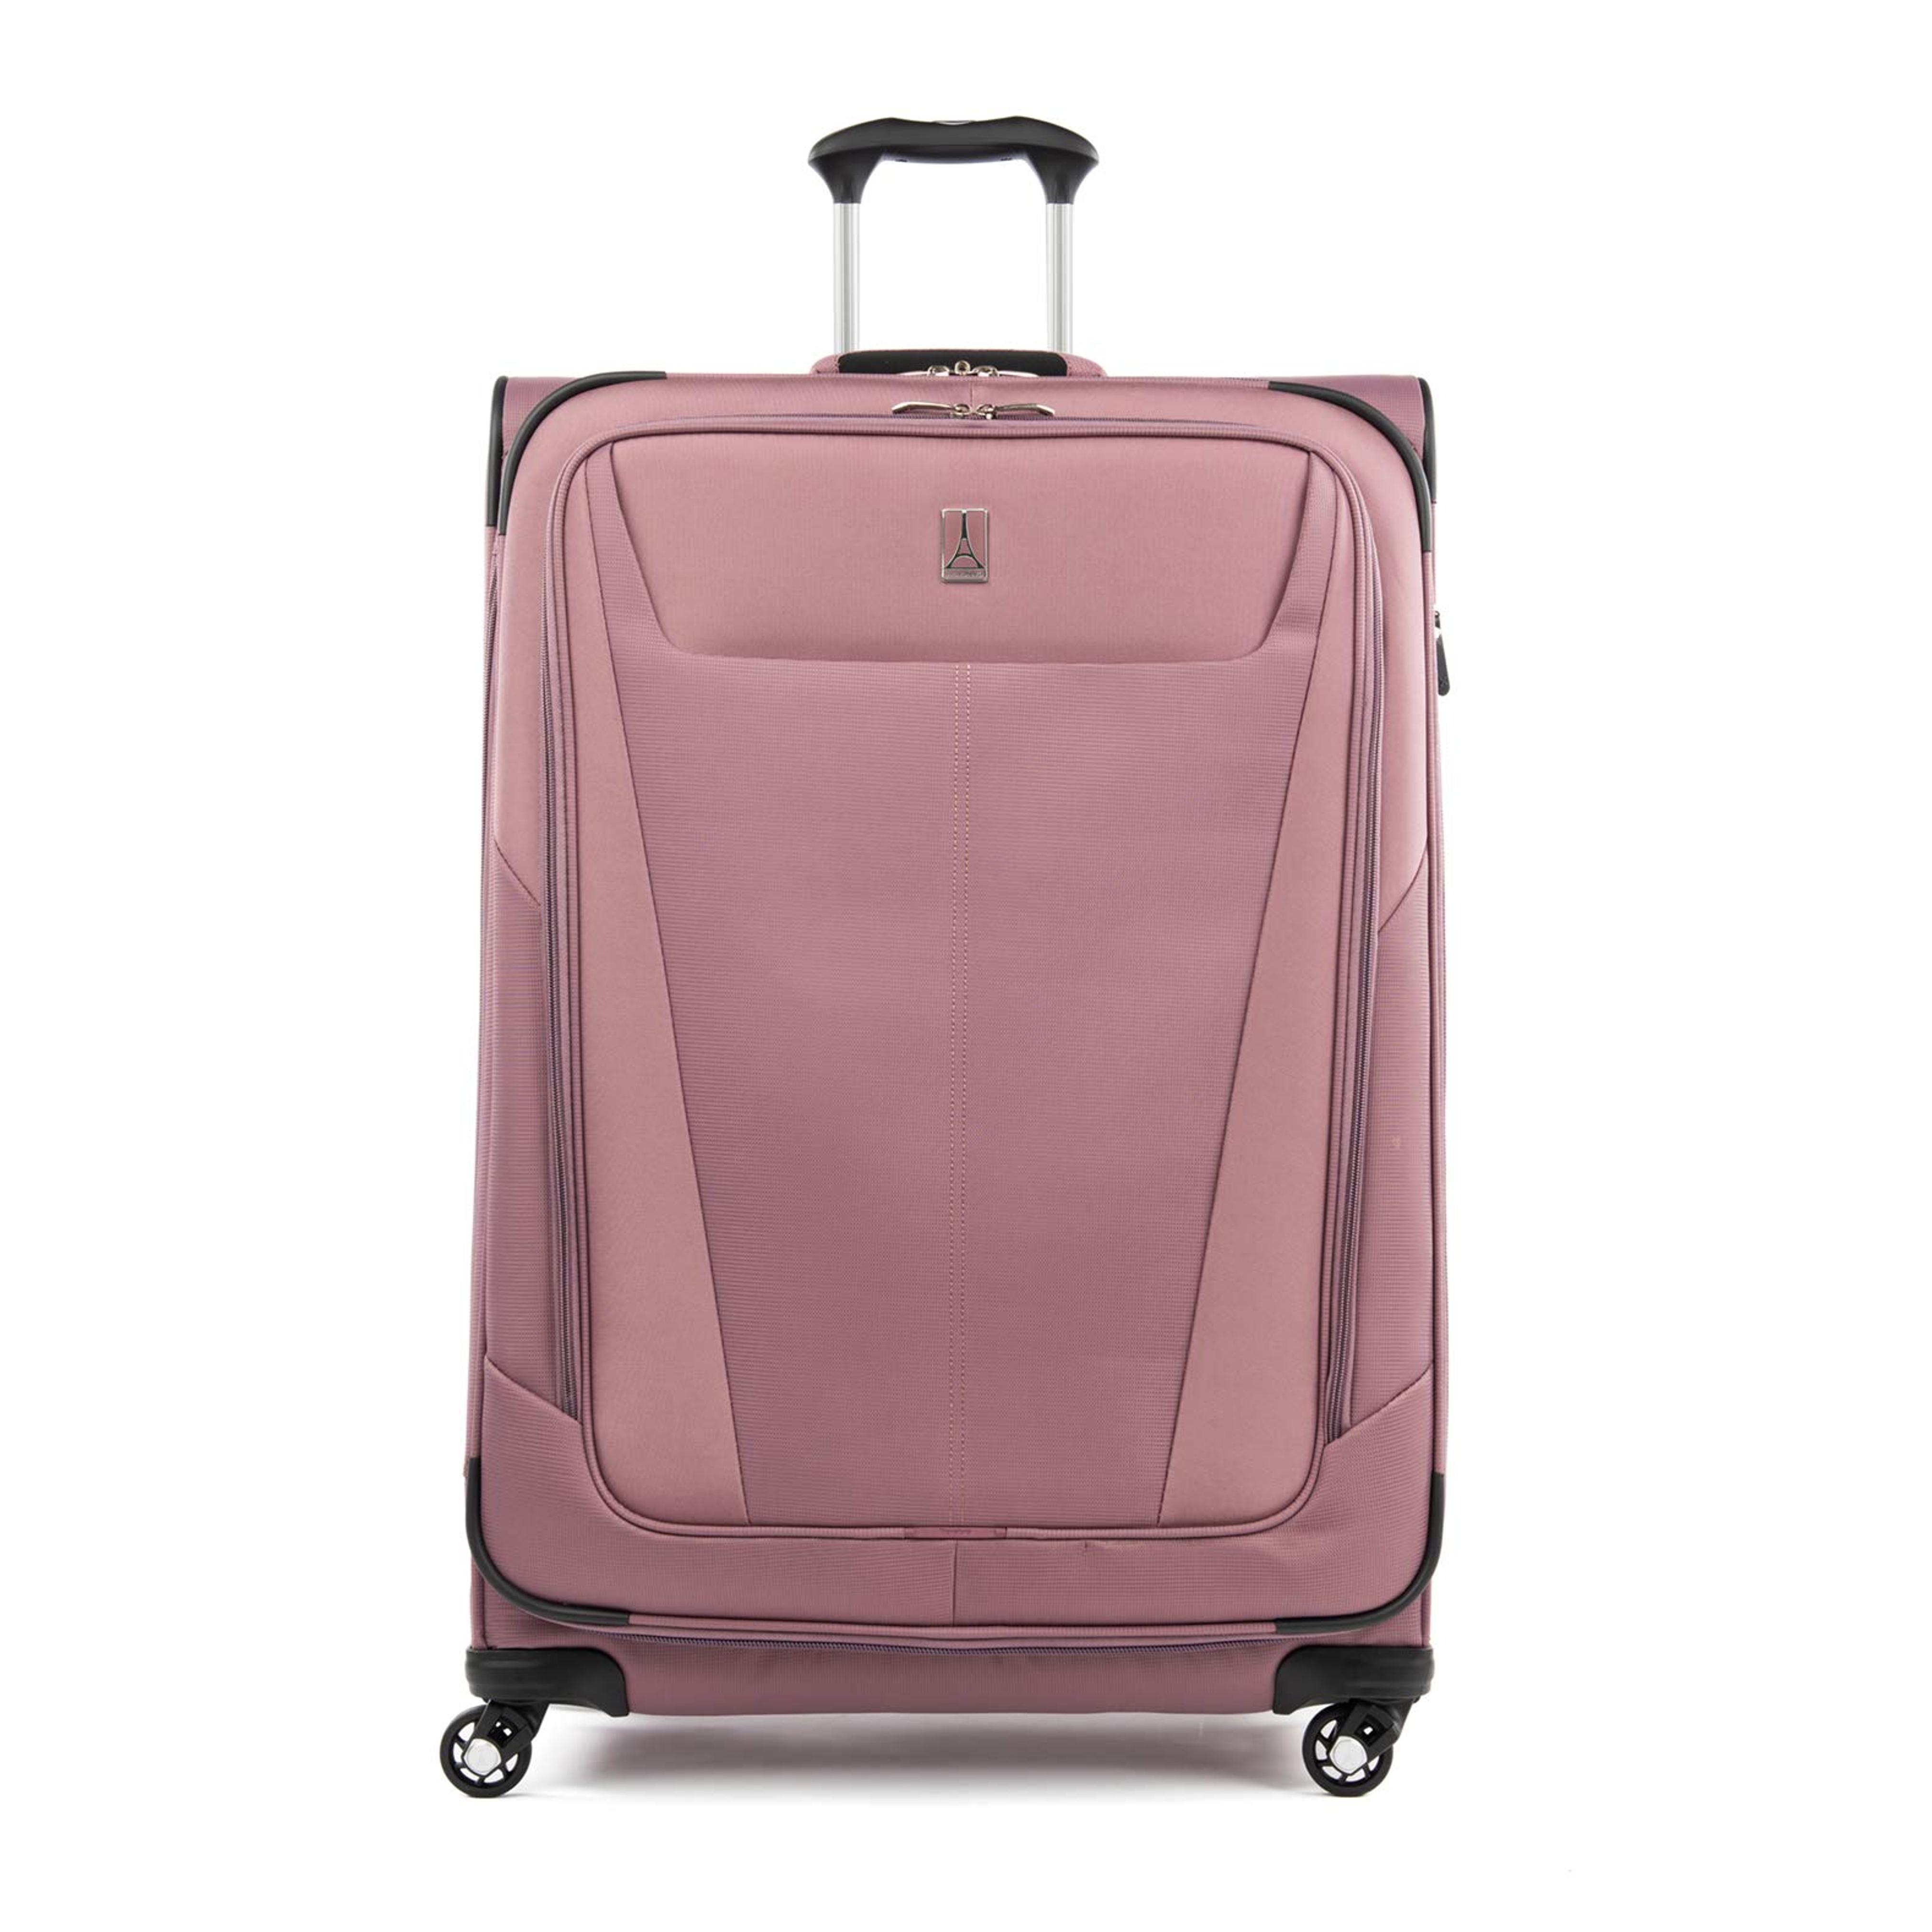 Travelpro Maxlite 5 Softside Expandable Luggage with 4 Spinner Wheels, Lightweight Suitcase, Men and Women, Dusty Rose Pink, Checked-Large 29-Inch